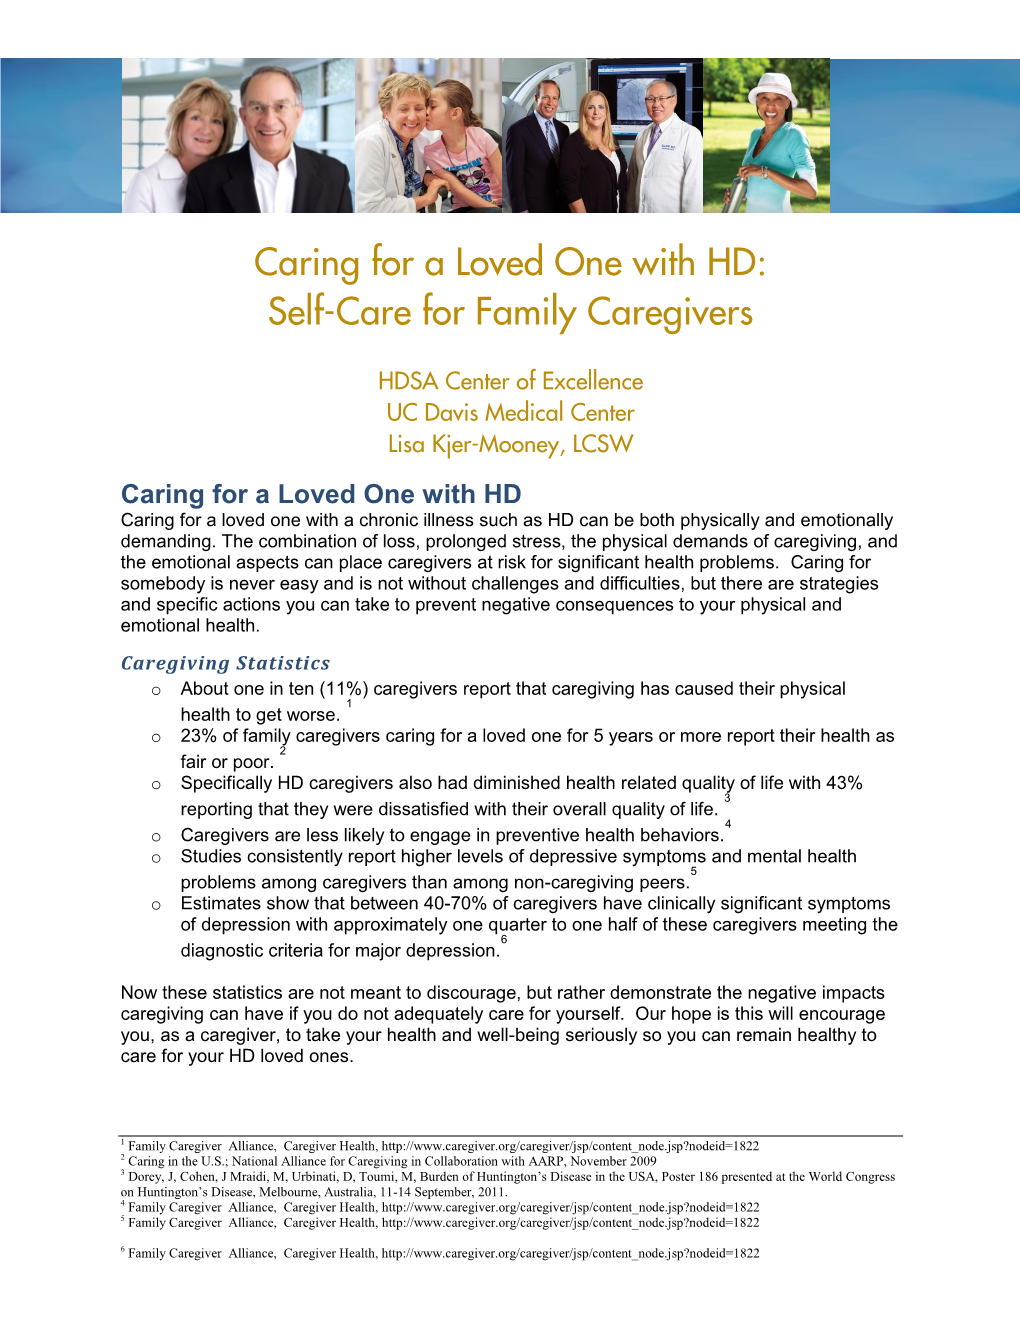 Self-Care for Family Caregivers